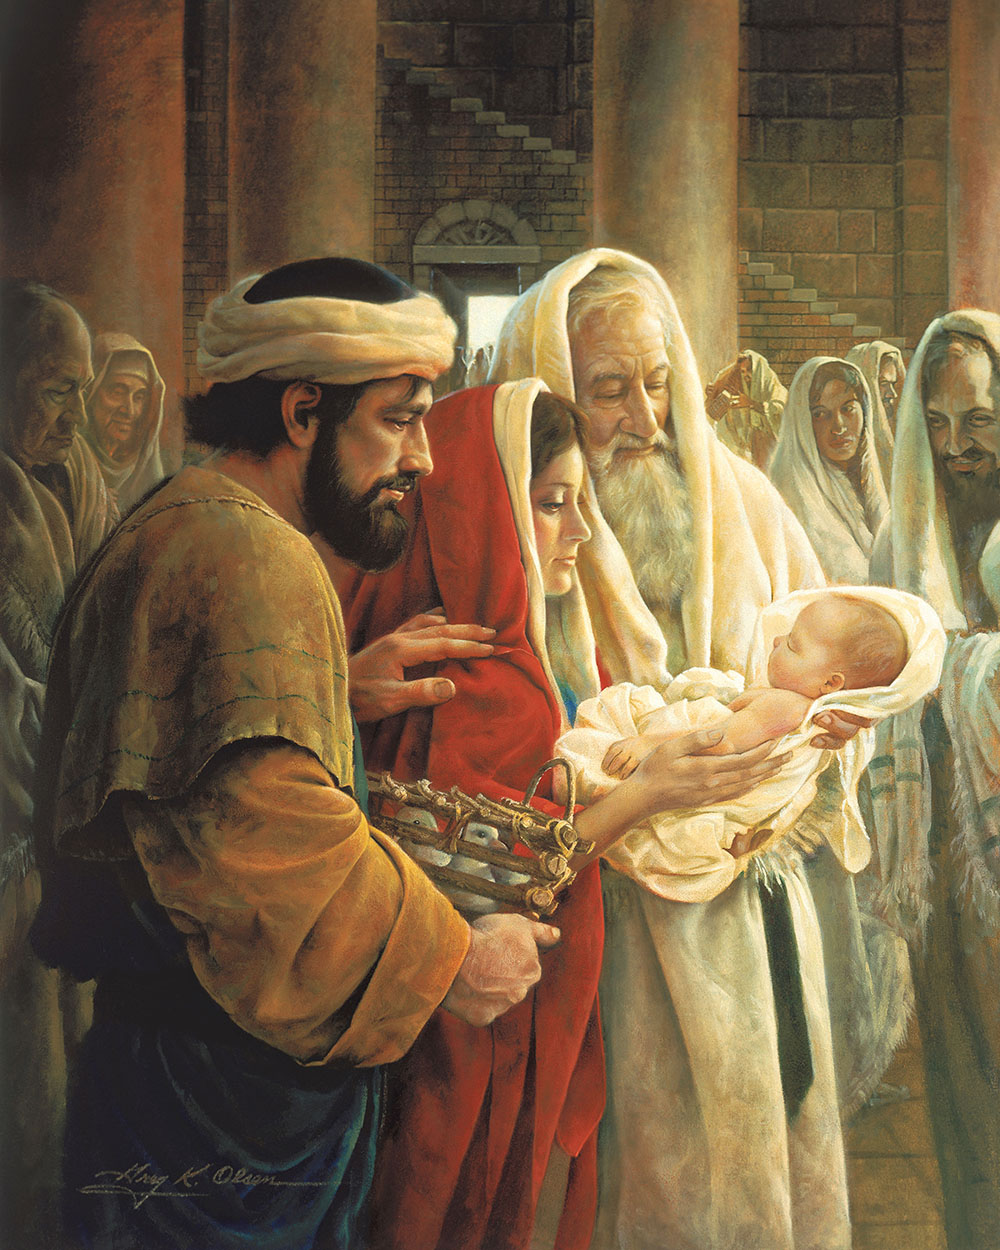 A Light to the Gentiles by Greg Olsen